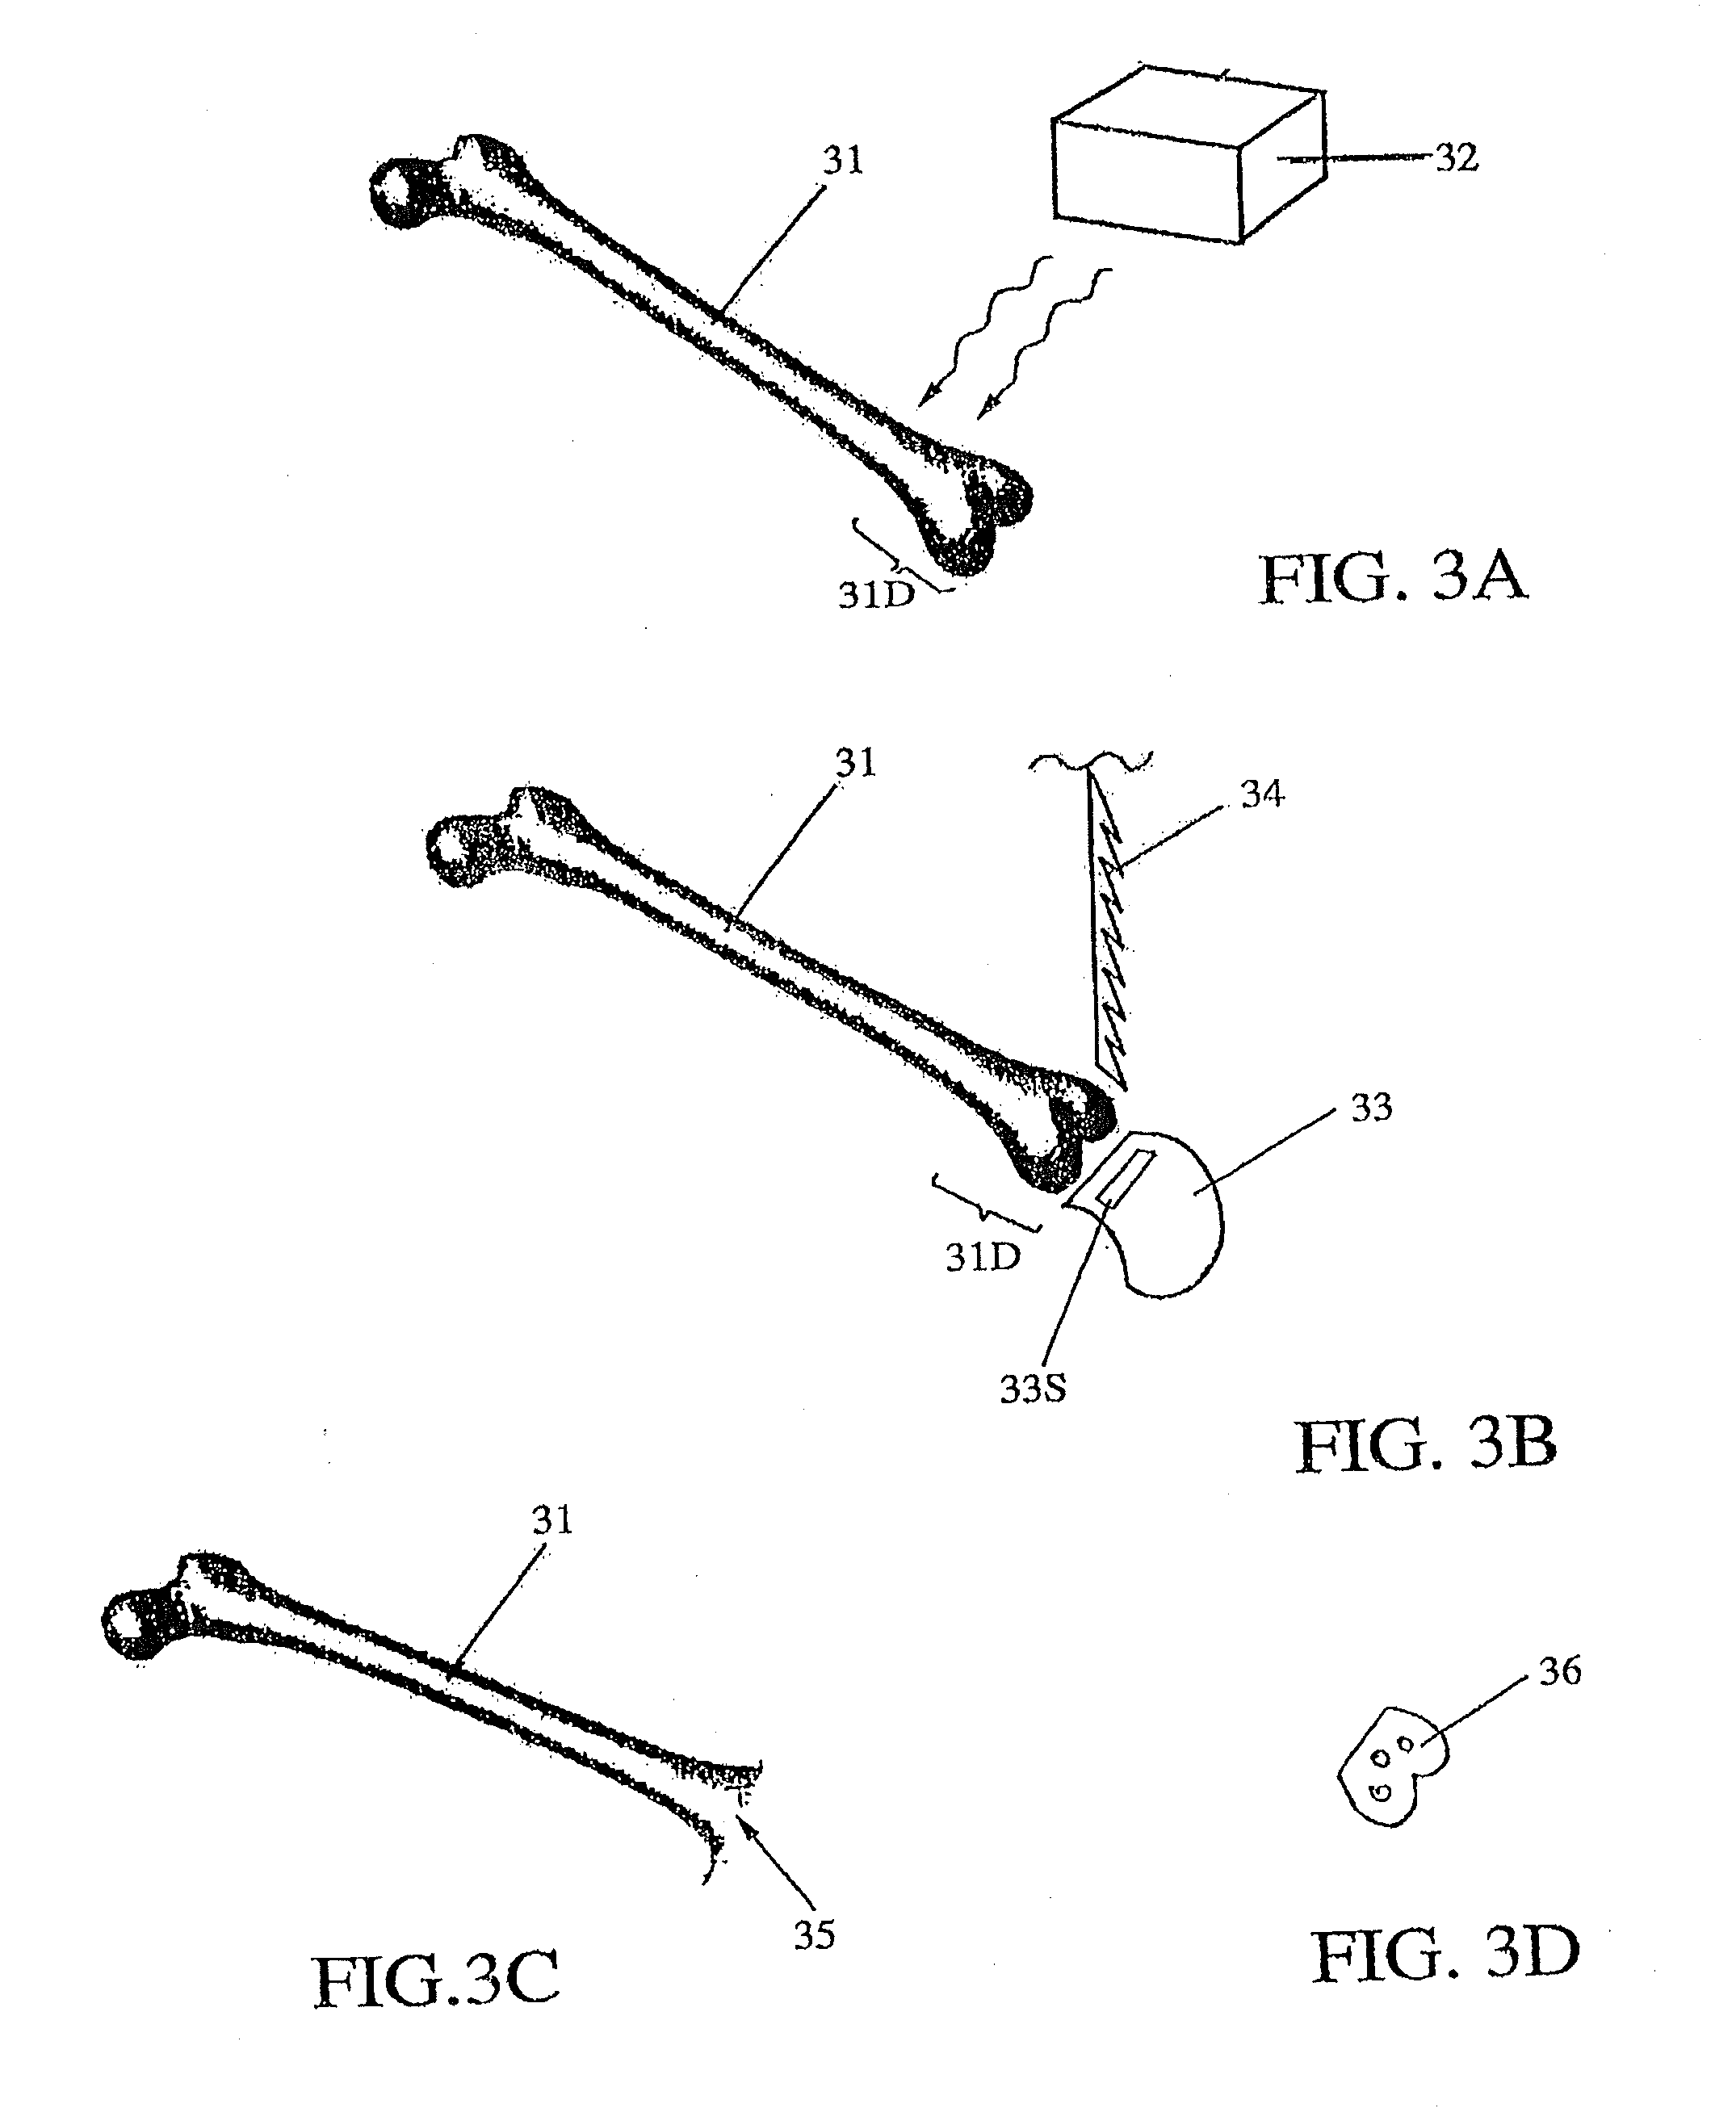 Total joint arthroplasty system